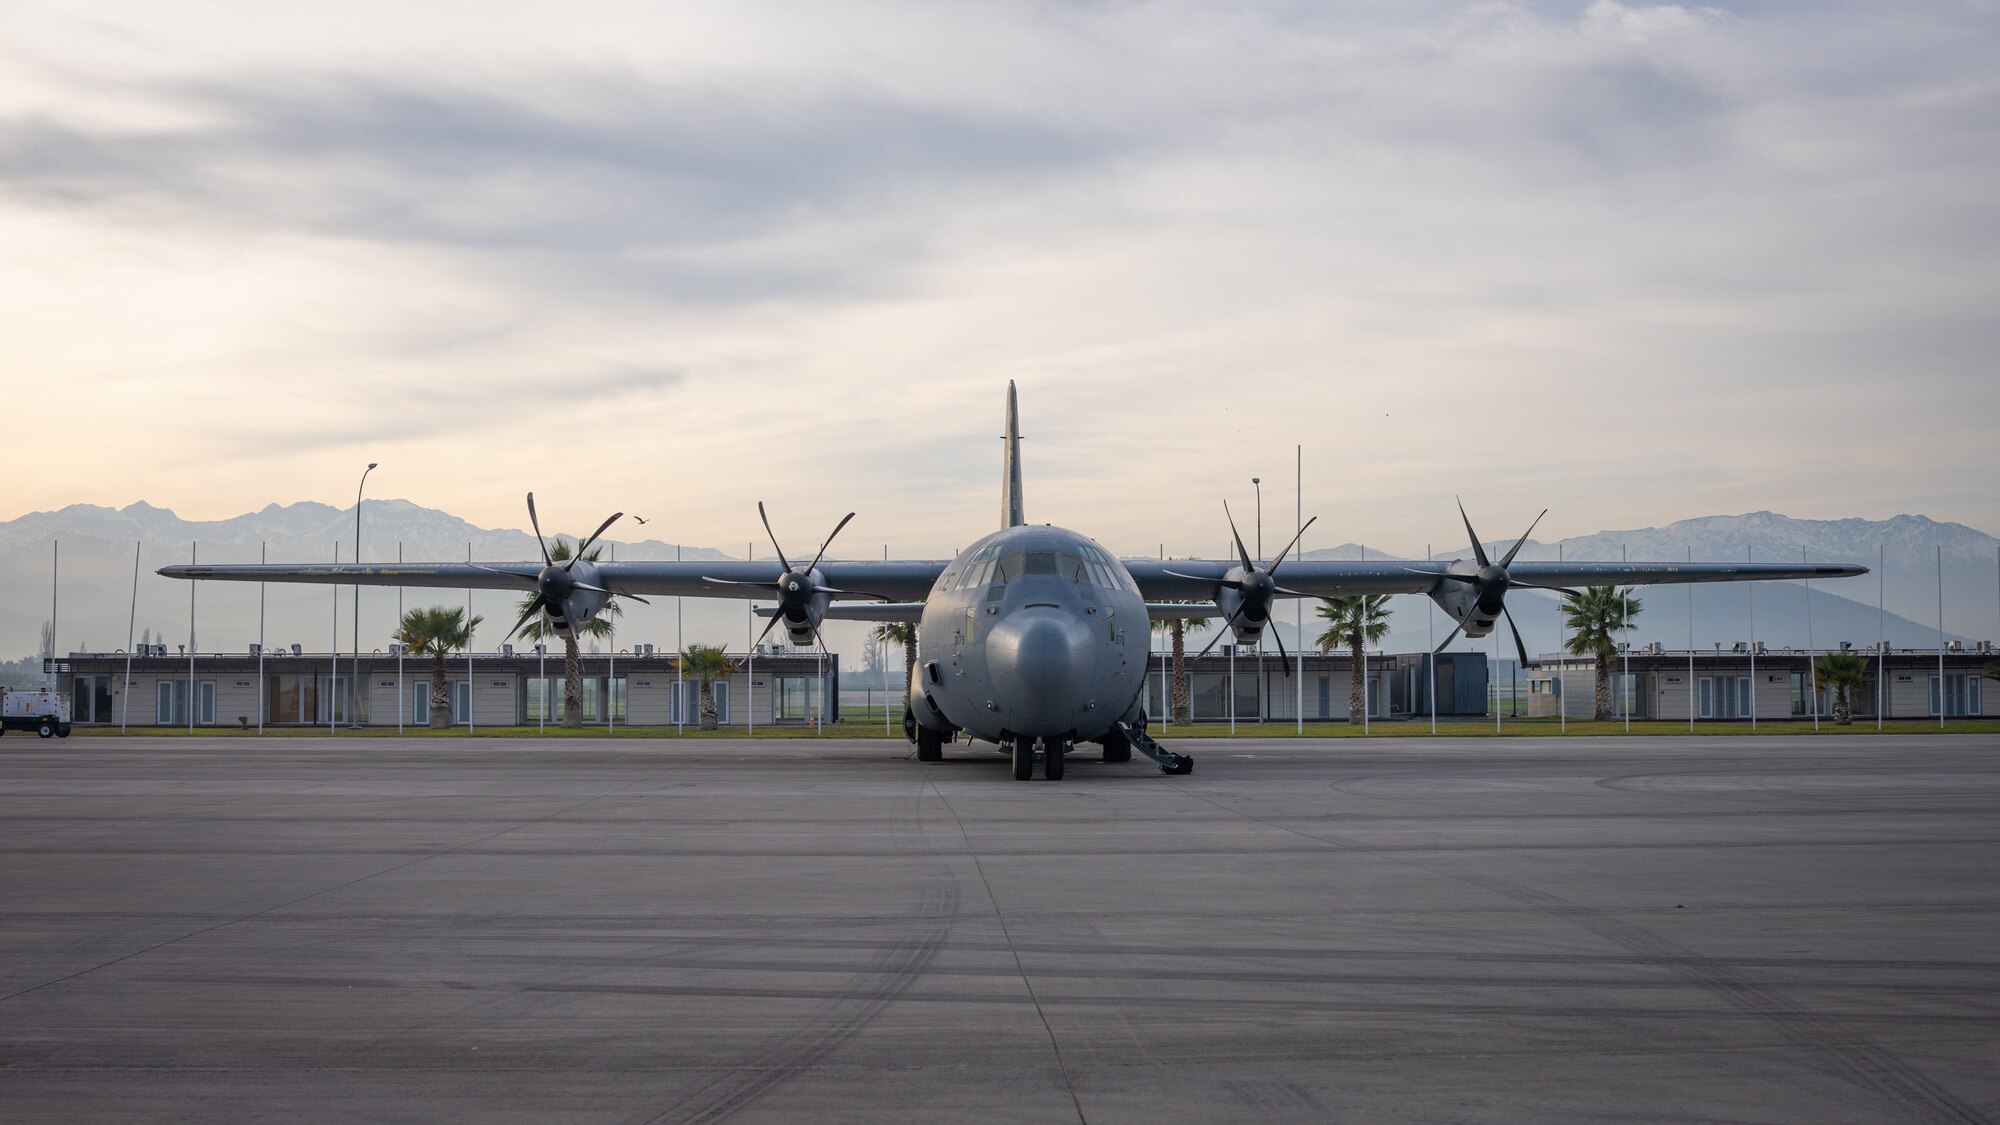 A C-130J Super Hercules from the 39th Airlift Squadron out of the 317th Airlift Wing, Dyess AFB, TX sits on a runway at the Santiago de Chile Airport, Santiago, Chile, July 28, 2023, during exercise Southern Star 23. Exercise Southern Star 23 is a Chilean-led full-scale Special Operations, Joint, and Combined Employment Exercise. The training consists of staff planning, tactical maneuvers, and collaboration among SOUTHCOM components’ staff, Chilean Armed Forces, and interagency partners during a stabilization scenario which facilitates the opportunity for participants to execute and assess the staff’s ability to plan, coordinate and execute command and control, logistical support, and decision-making processes in a crisis scenario. (U.S. Air Force photo by Staff Sgt. Clayton Wear)